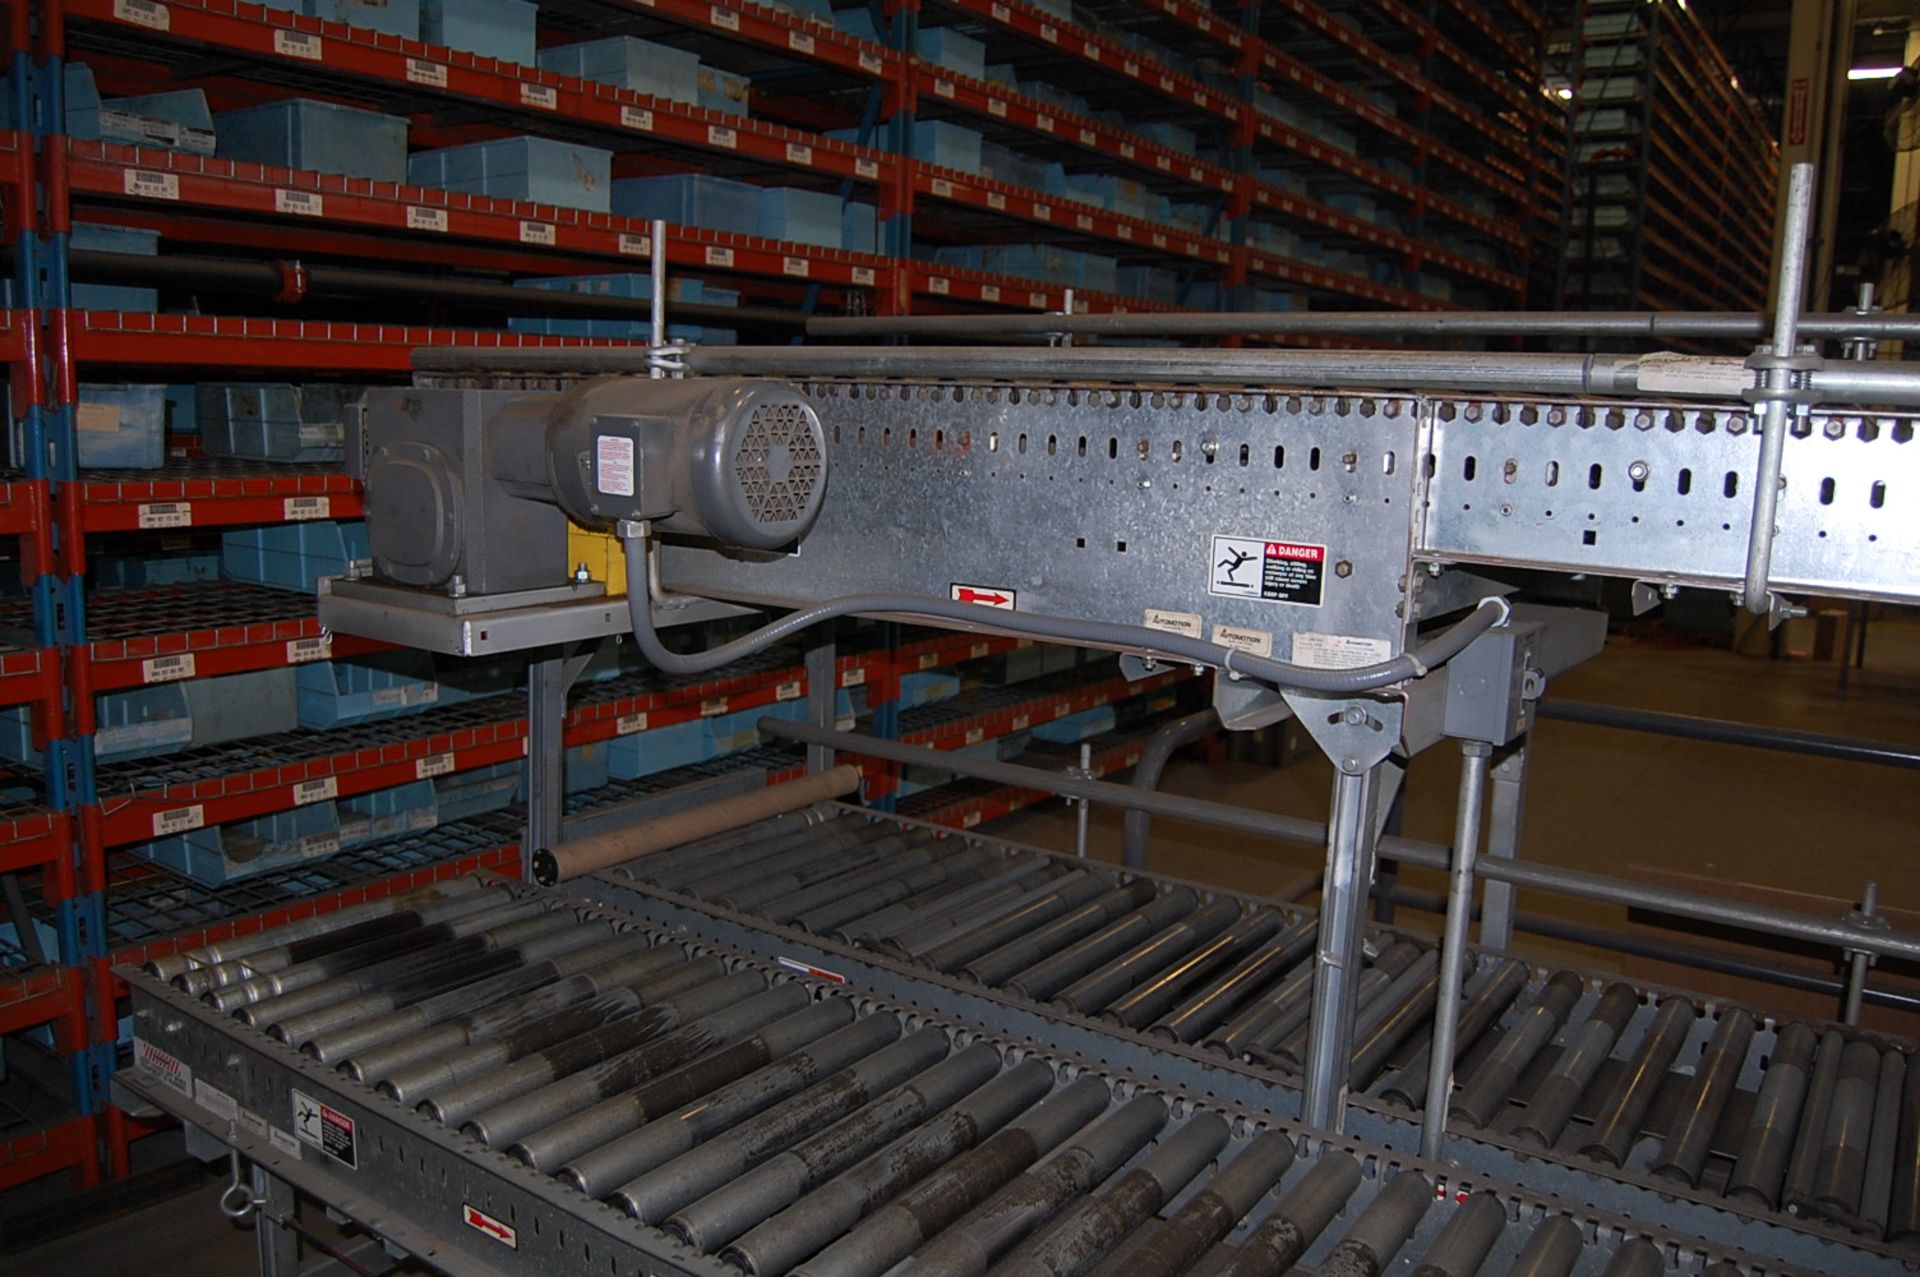 White Conveyors Model Remstar Series 2400 Vertical Carousel Storage/Inventory System - Image 38 of 49